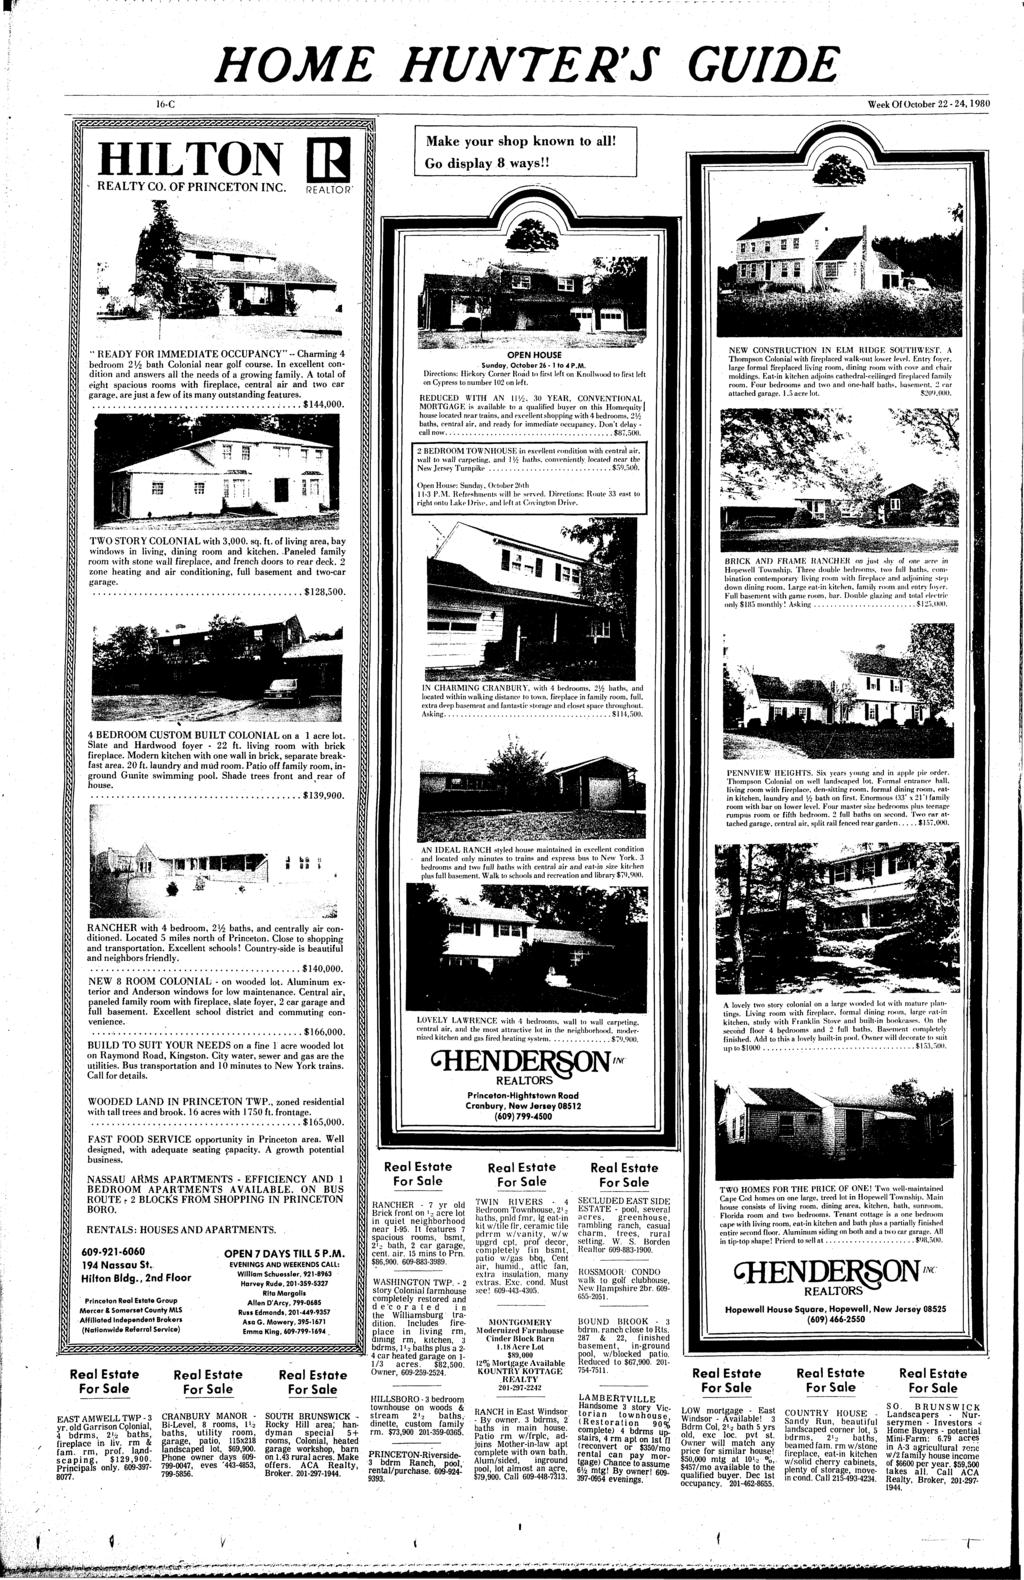 HOME HUNTER'S GUIDE 16-C Week Of October 22-24,1980 HILTON REALTY CO. OF PRINCETON INC. REALTOR" Make your shop known to all! Go display 8 ways!